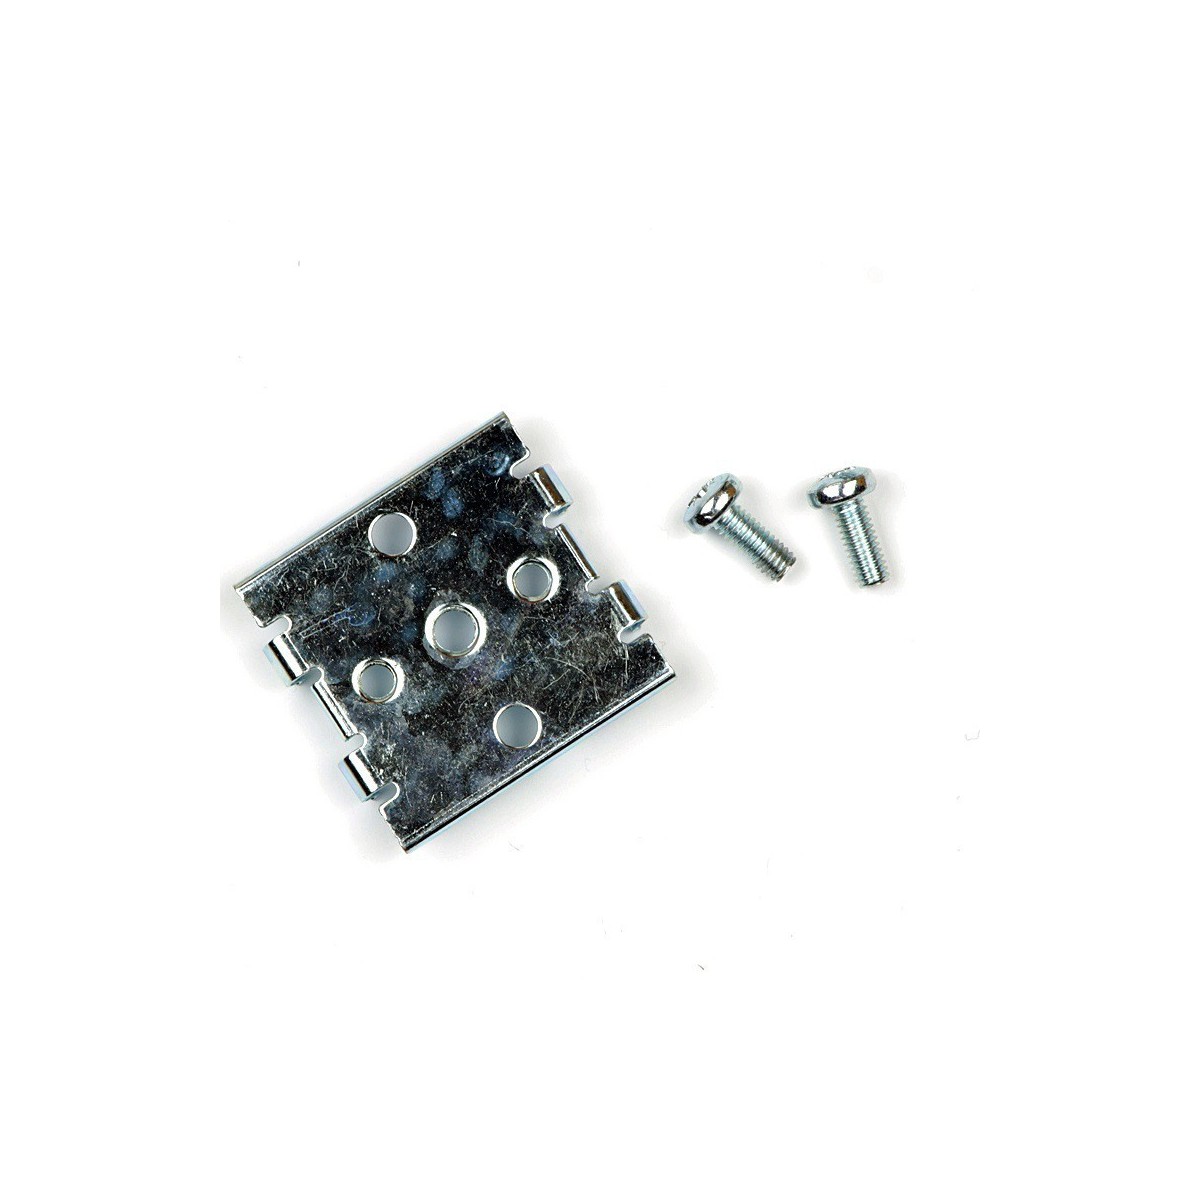 Self-adhesive base with thread and screw M3 x 6 mm